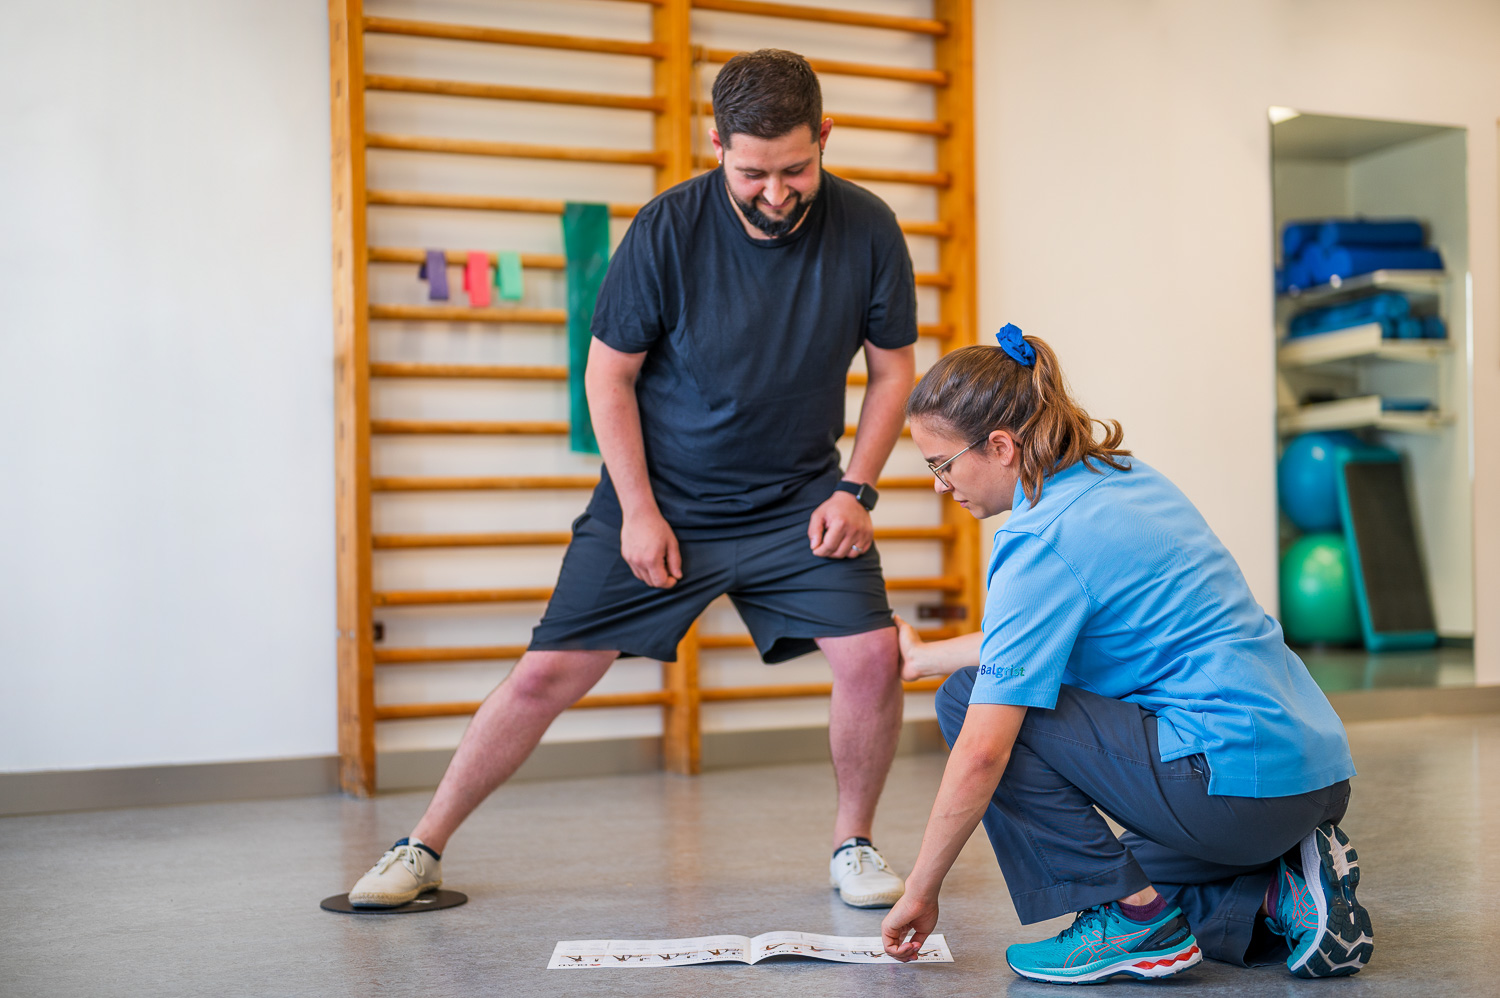 Physical therapist instructs standing patient performing a lateral lunge to the right.